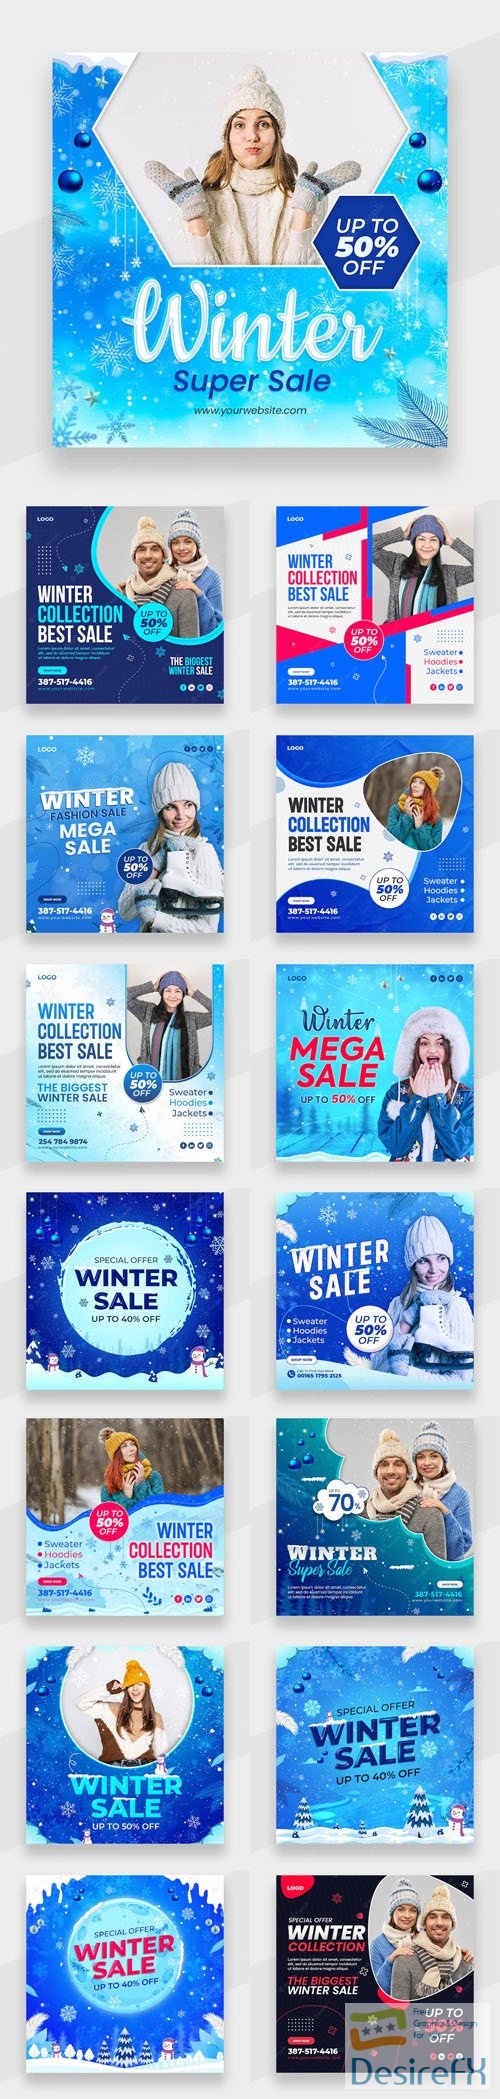 30+ Winter Sales Banners PSD Templates